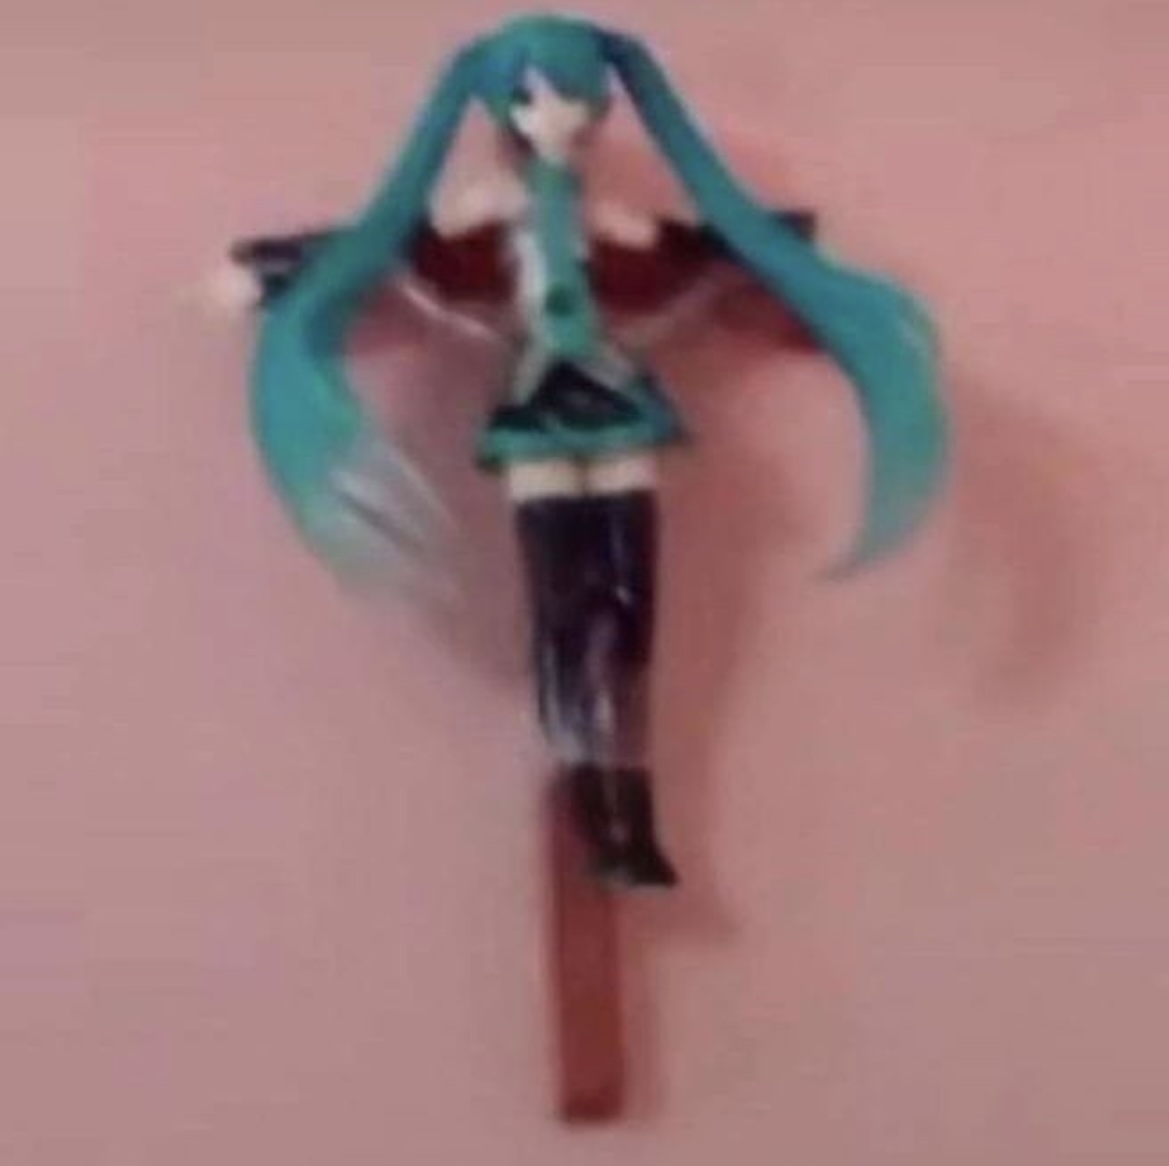 Hatsune Miku died for our sins...
Don't scroll without typing 'Amen.' 🙏